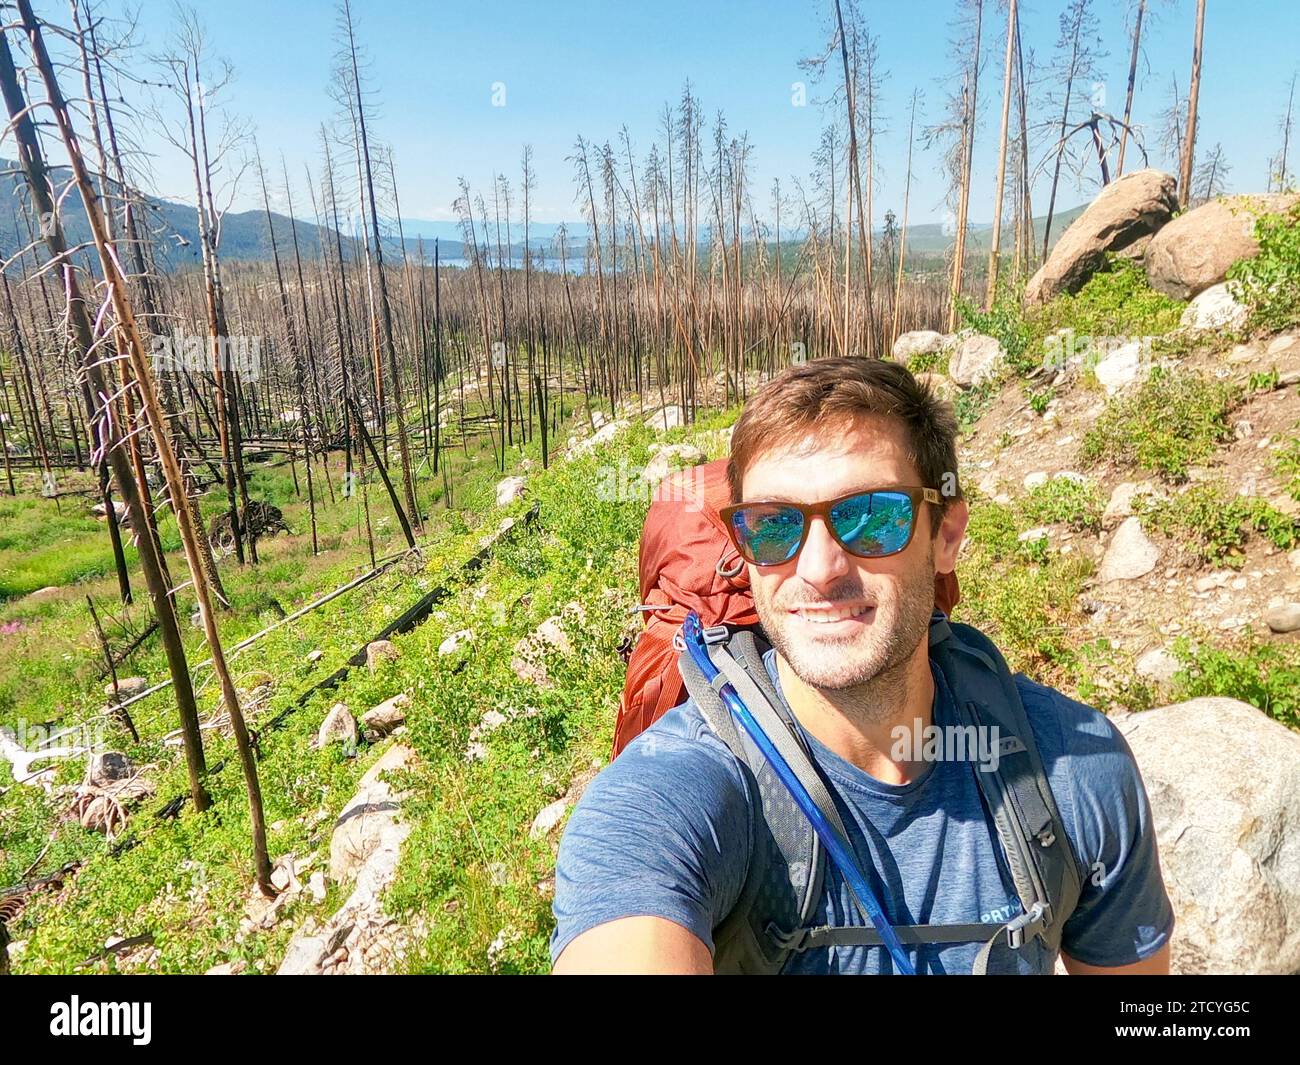 A male hiker captures a selfie against the contrasting backdrop of a recovering burnt forest in Rocky Mountain National Park. Stock Photo